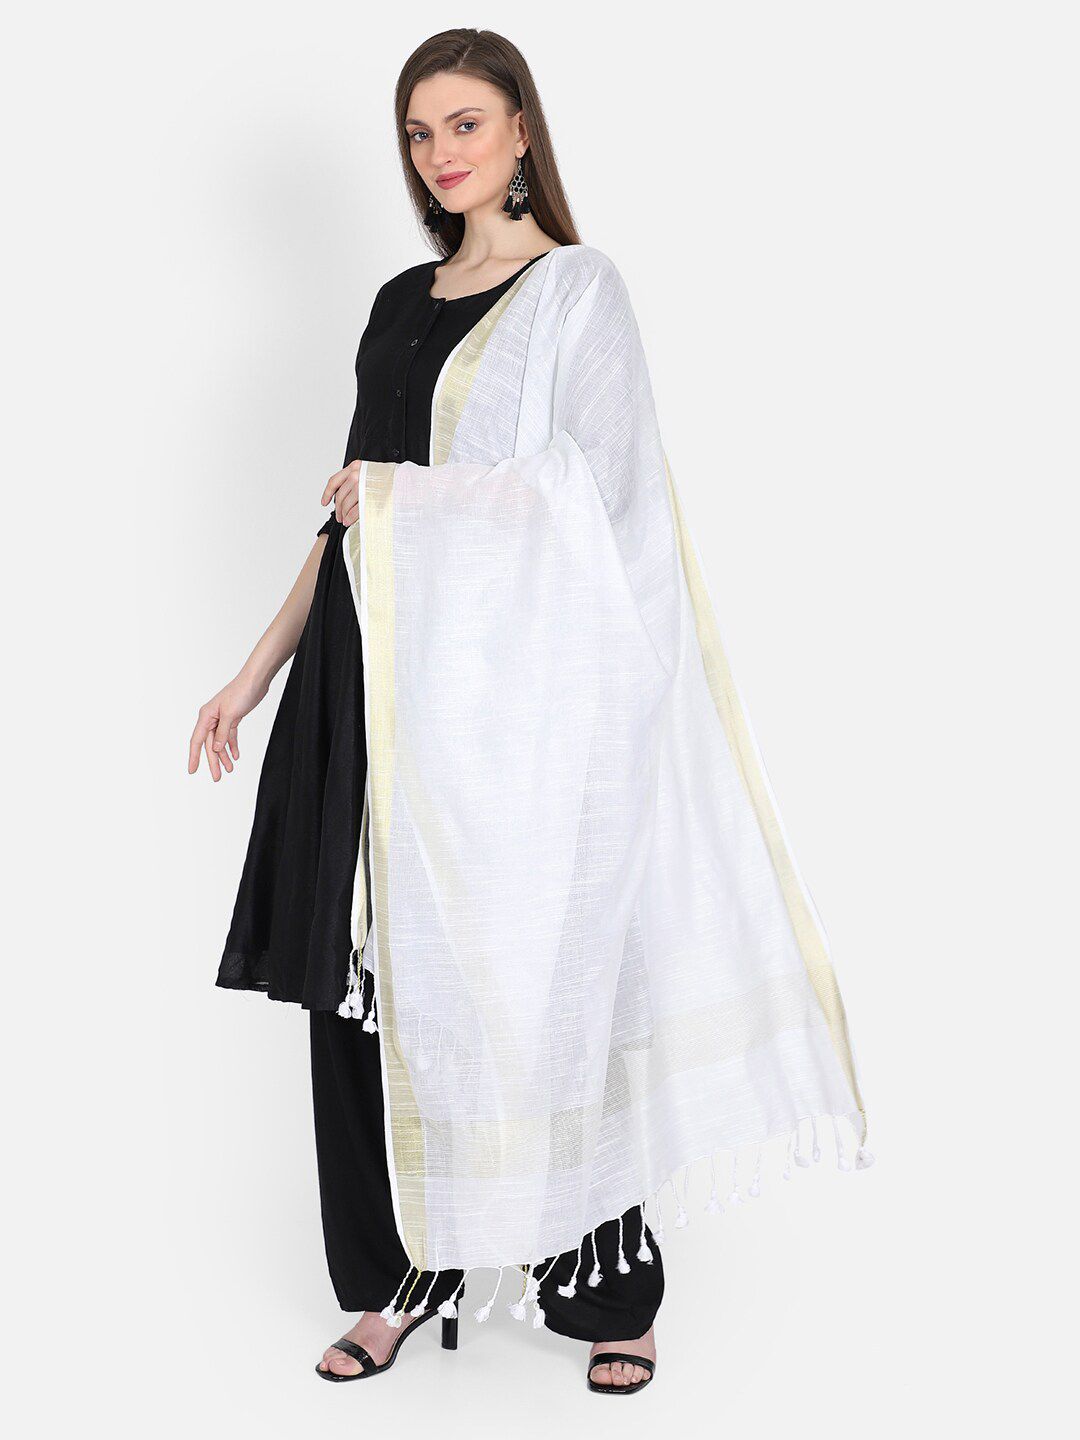 THE WEAVE TRAVELLER White & Gold-Toned Woven Design Cotton Blend Dupatta Price in India